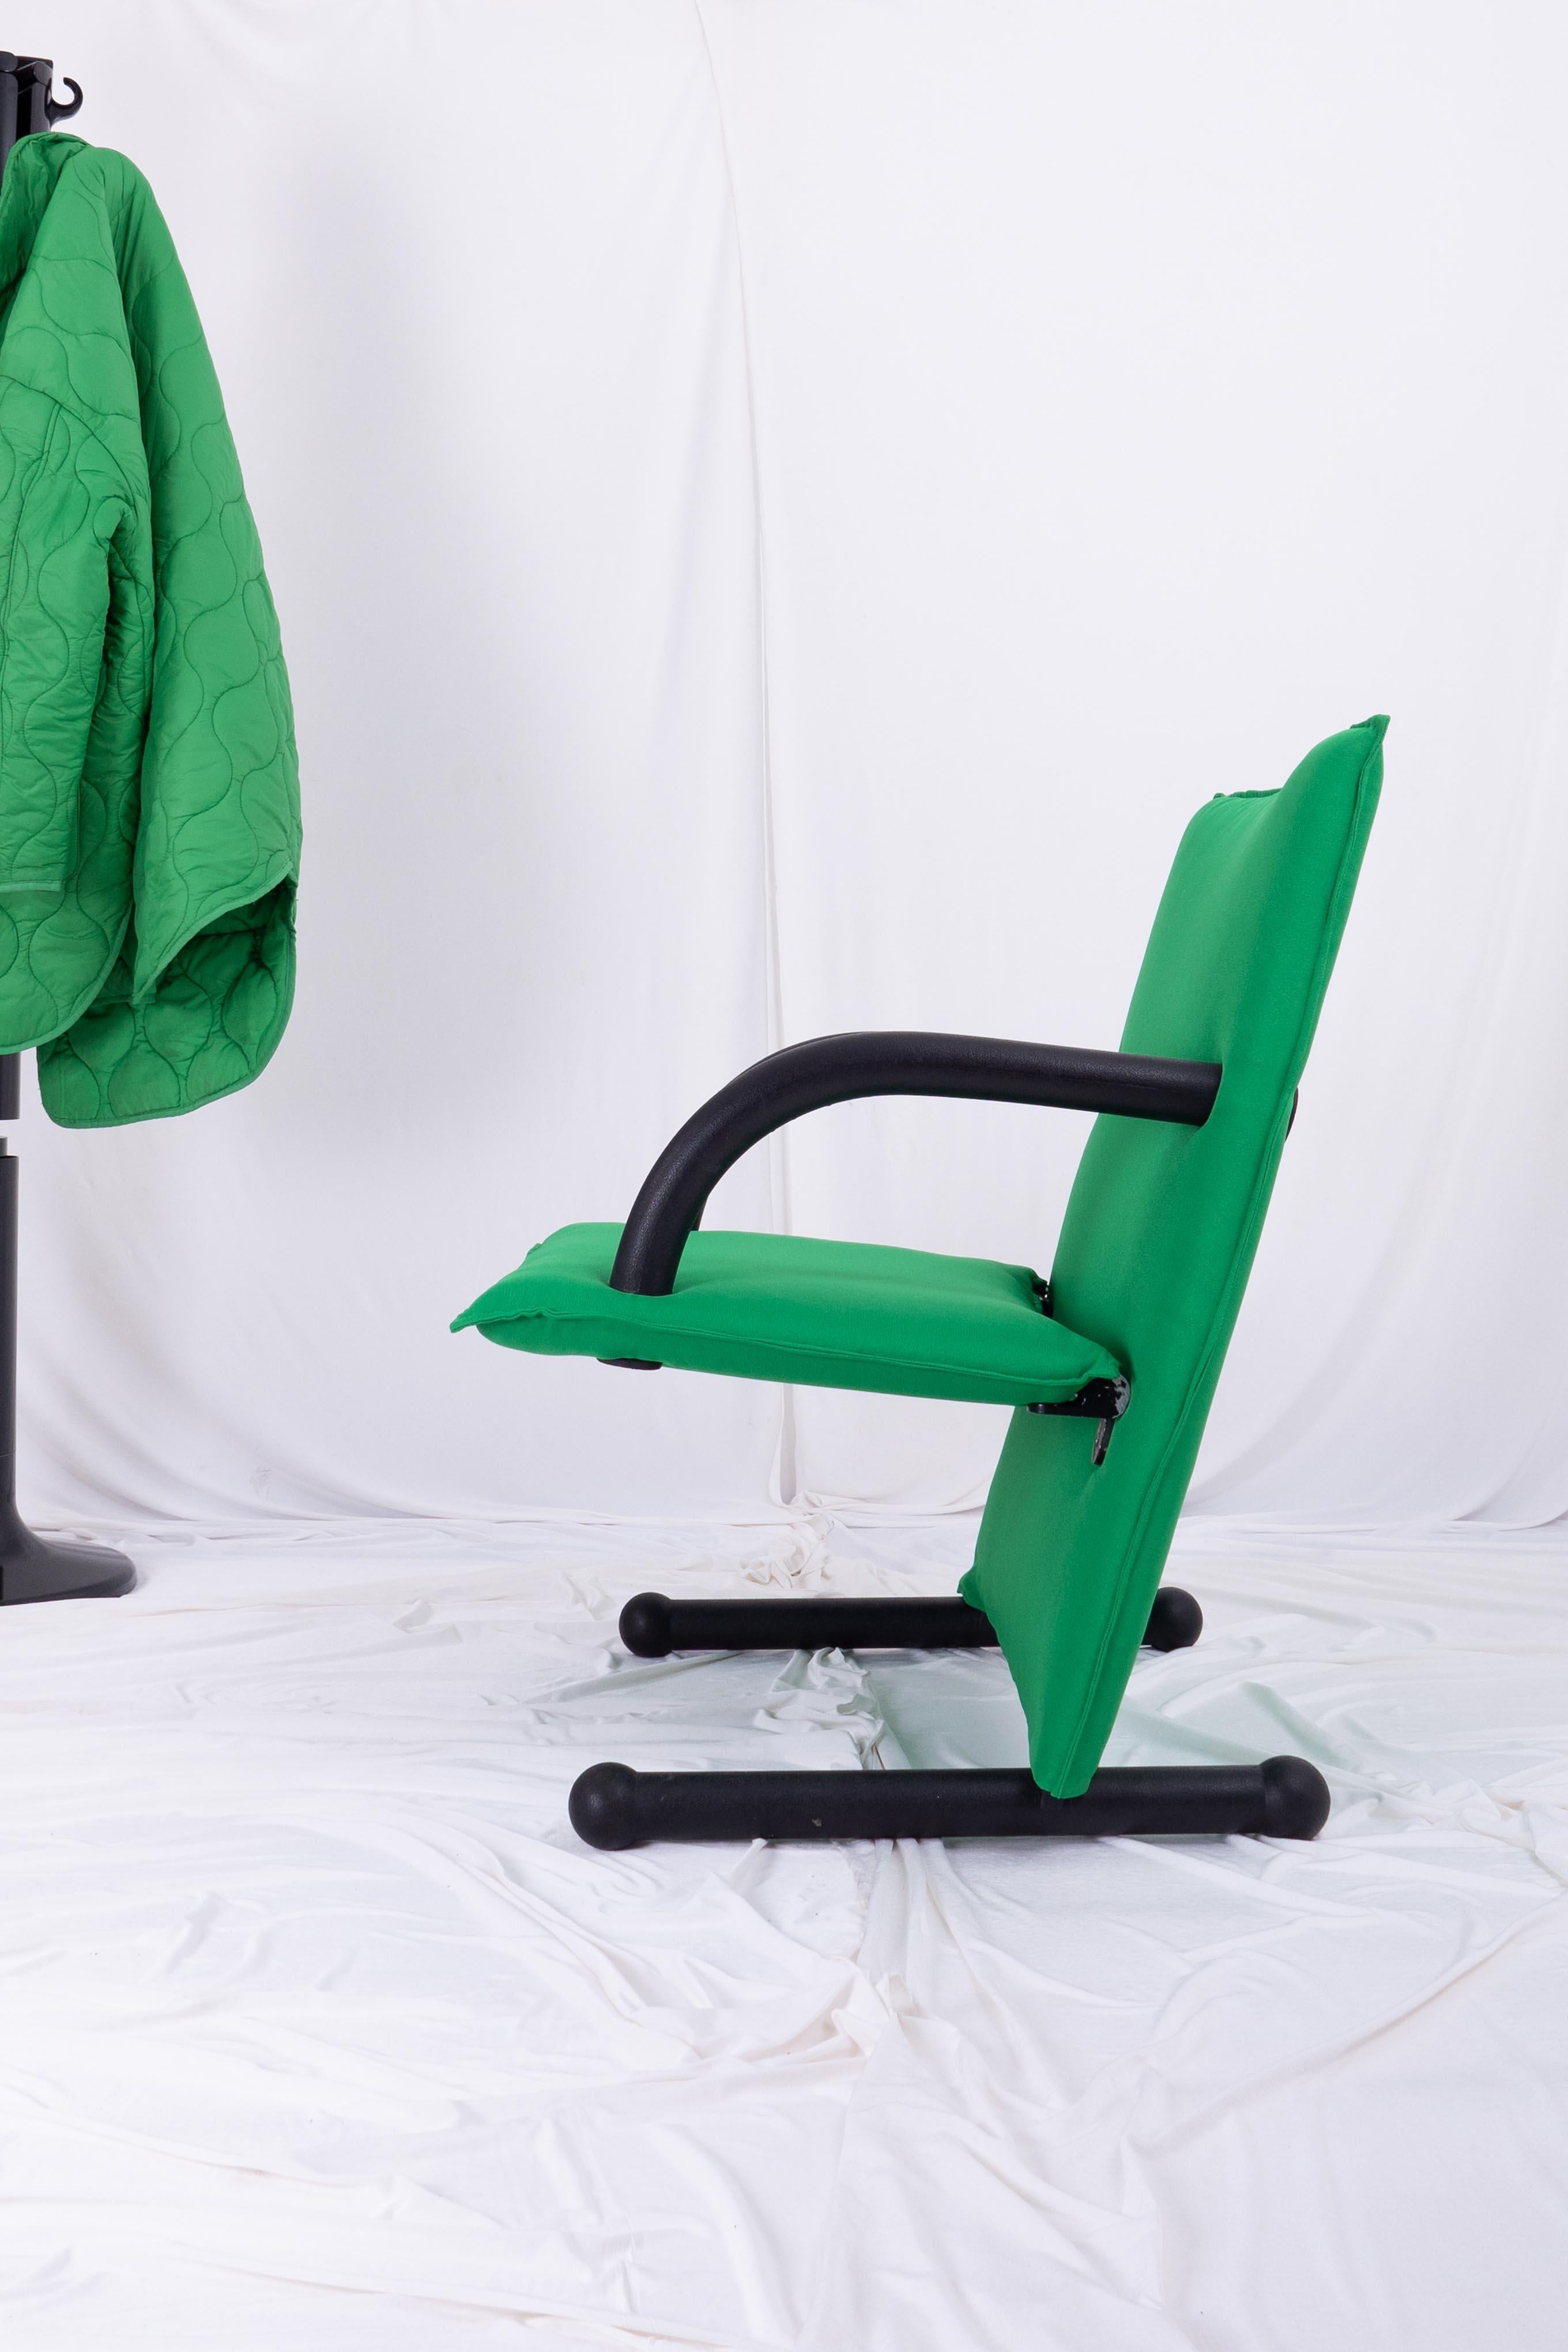 We’re not really into mentioning other brands on this site but this original T-Line chair is giving us the strongest United Colours of Benetton vibe (circa 1997). We sound surprised but we shouldn’t be — we chose to re-upholster it that way.

And